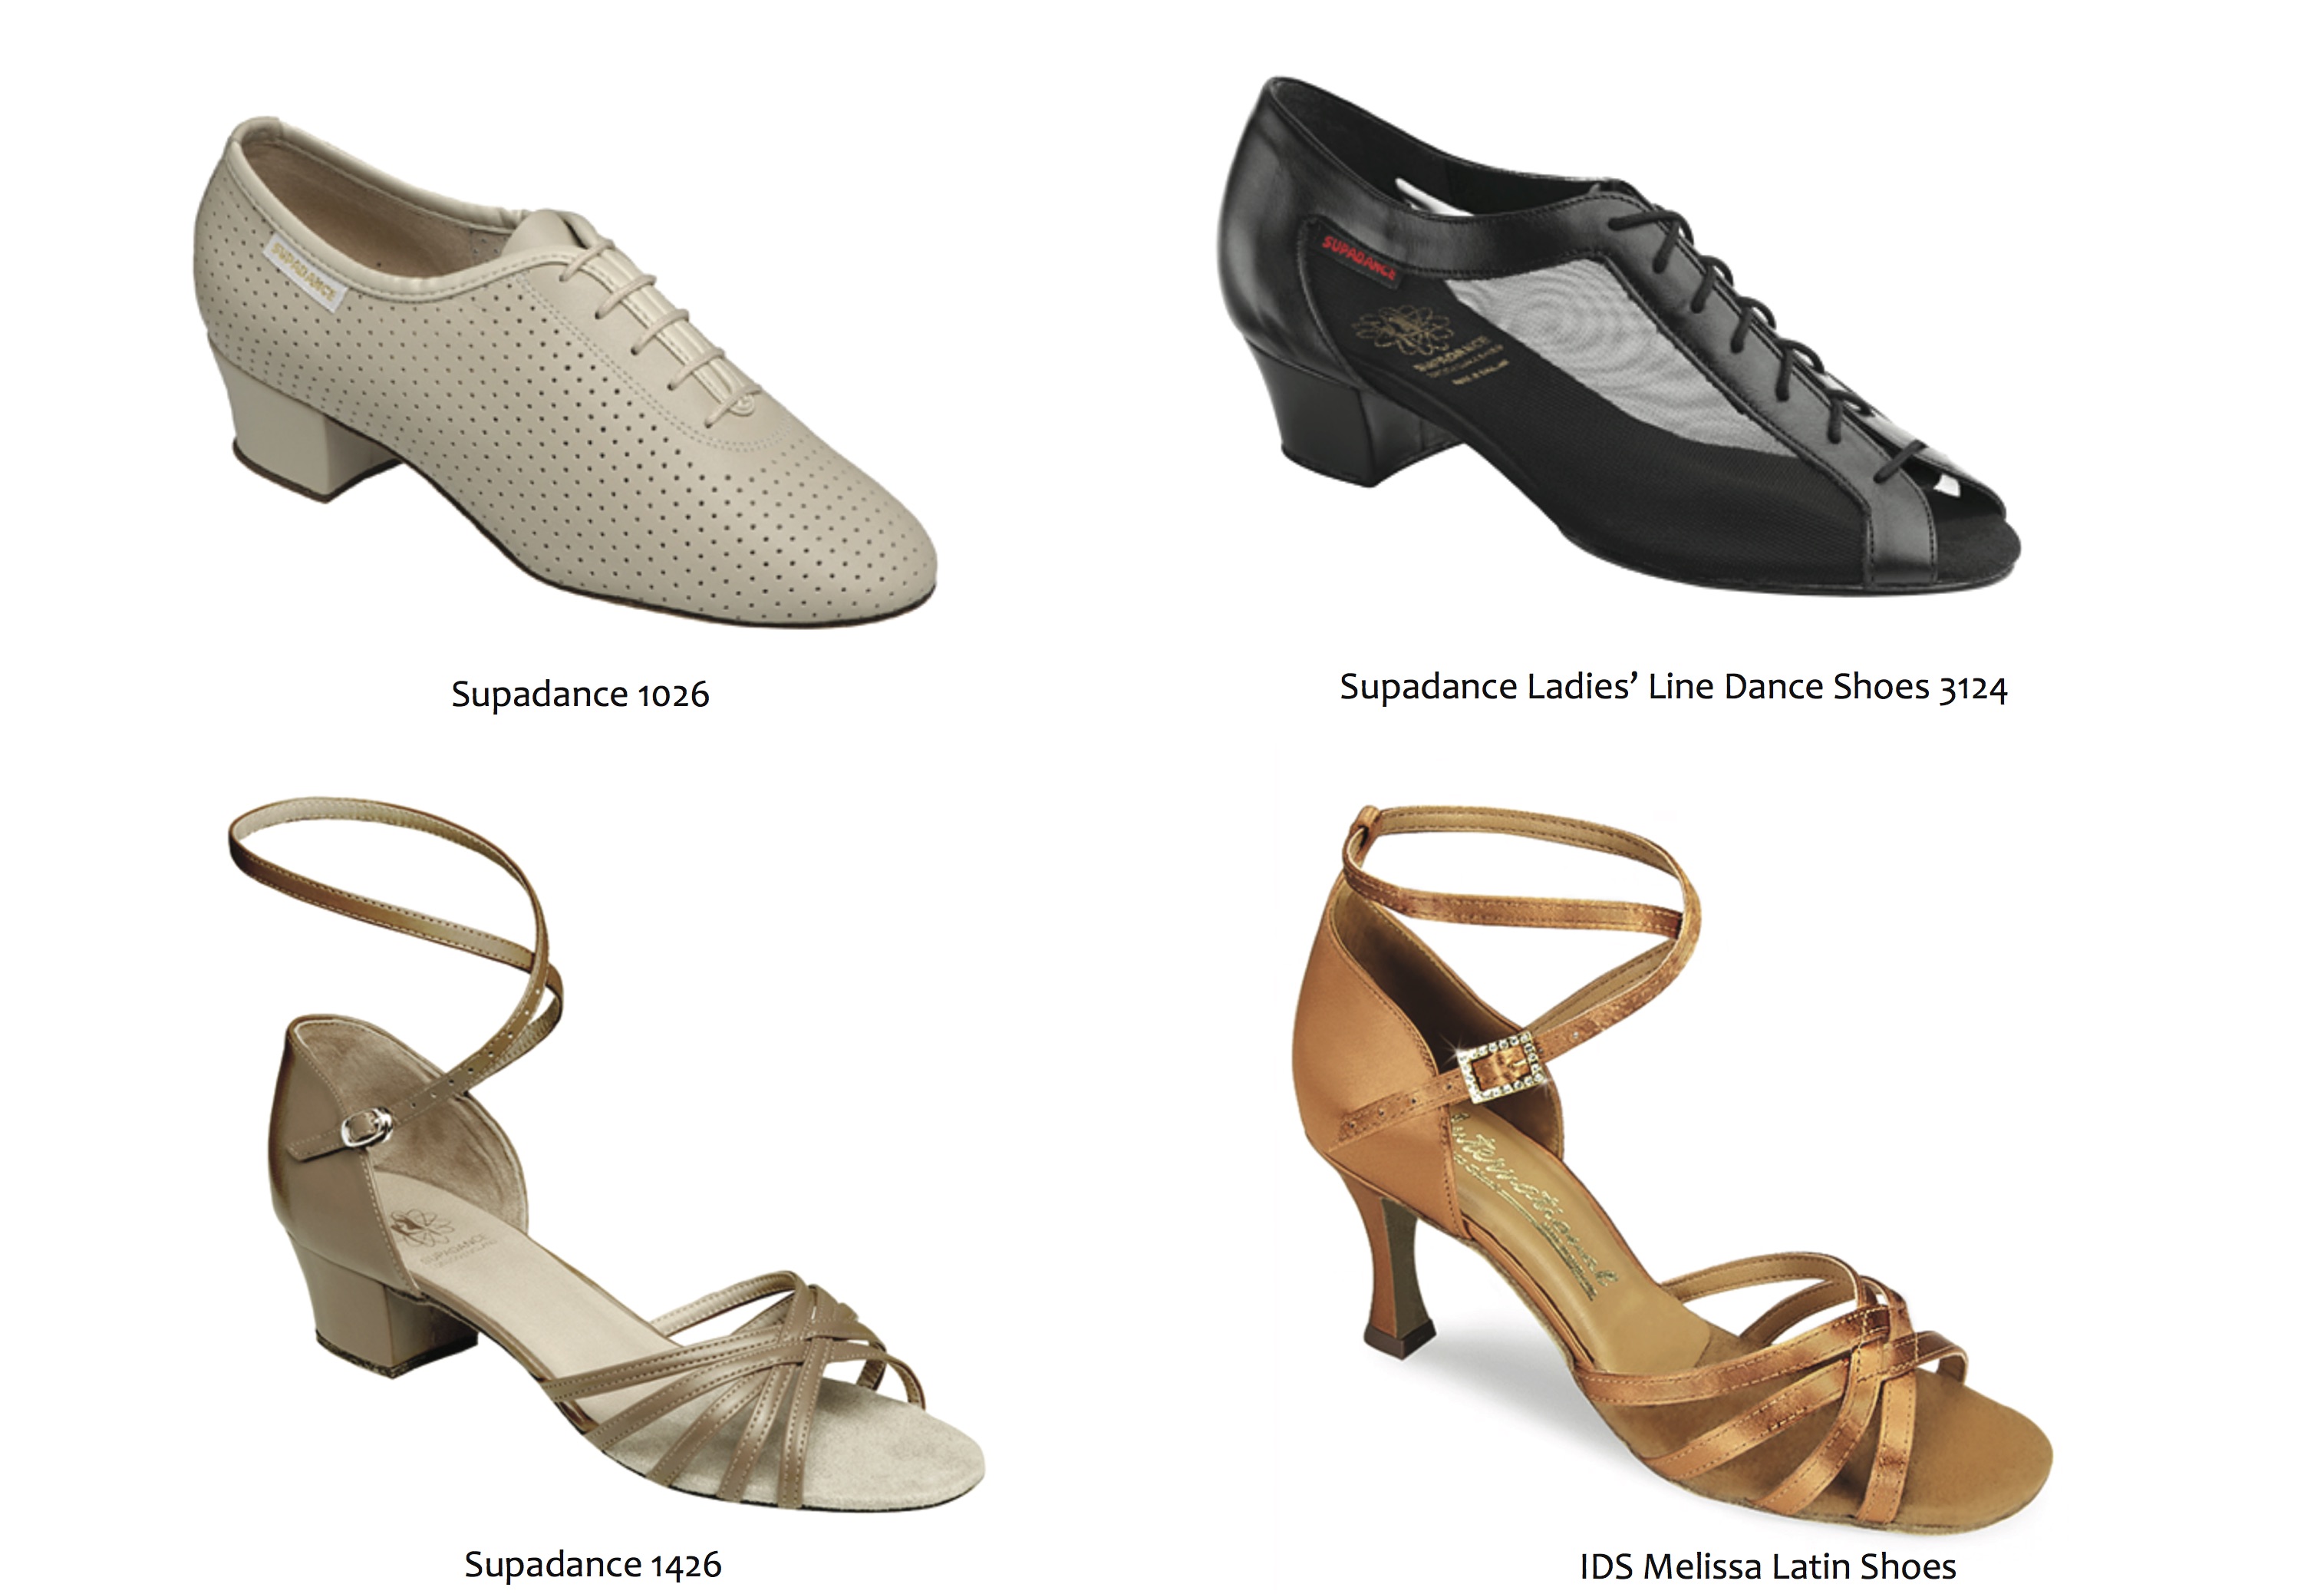 types of dance shoes